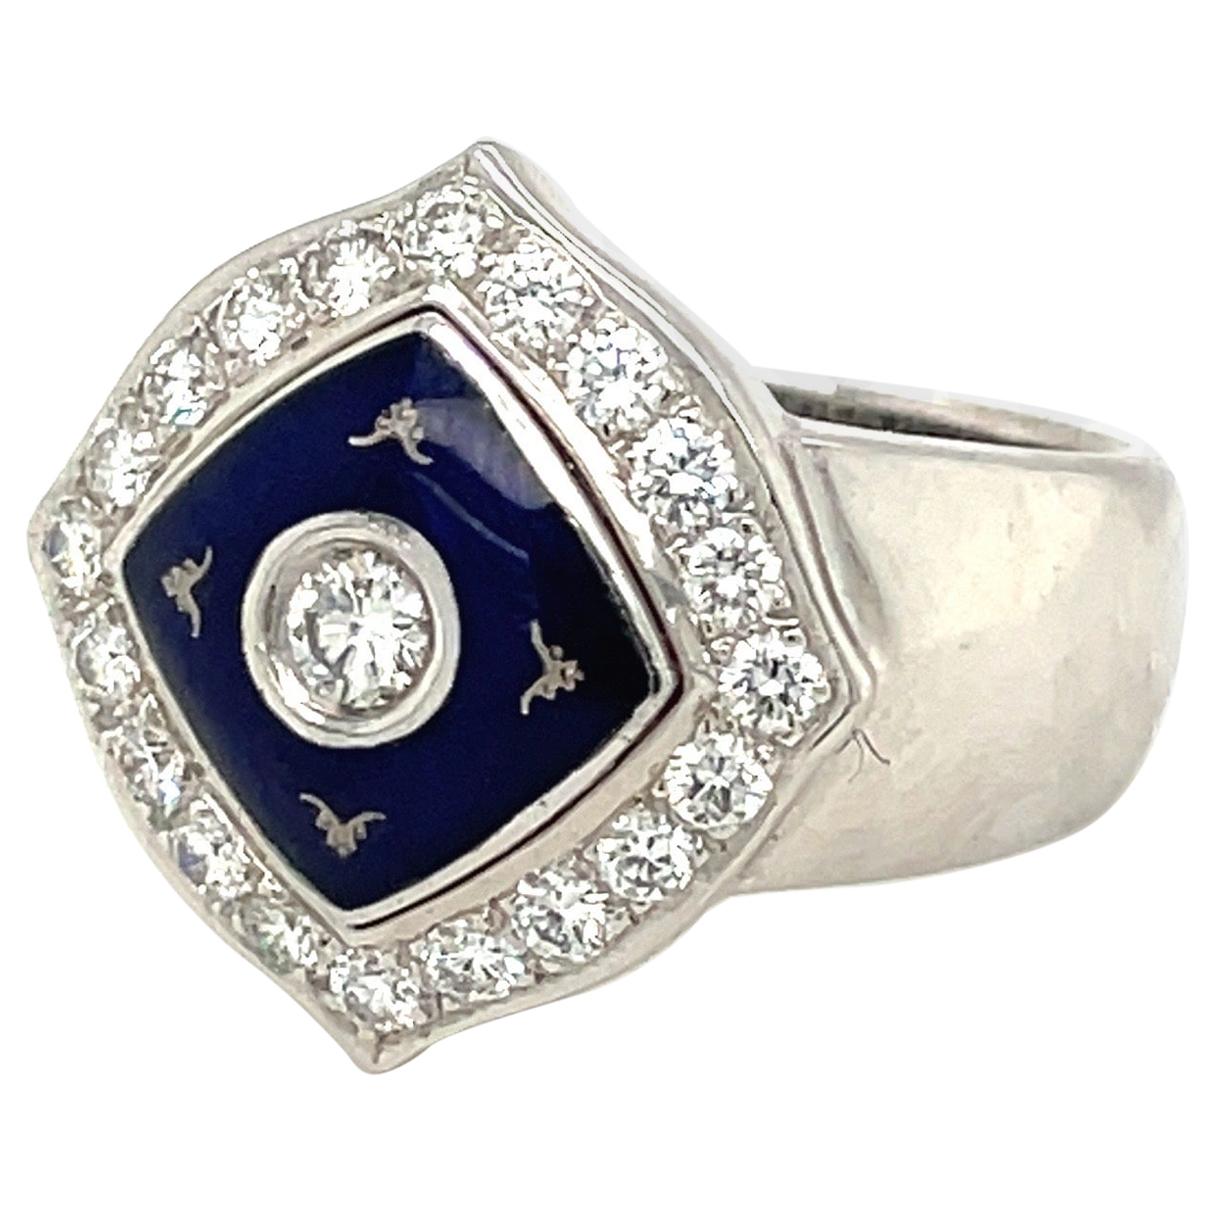 Faberge 18KT White Gold Diamond 0.66 Carat & Blue Enamel Ring, with Certificate